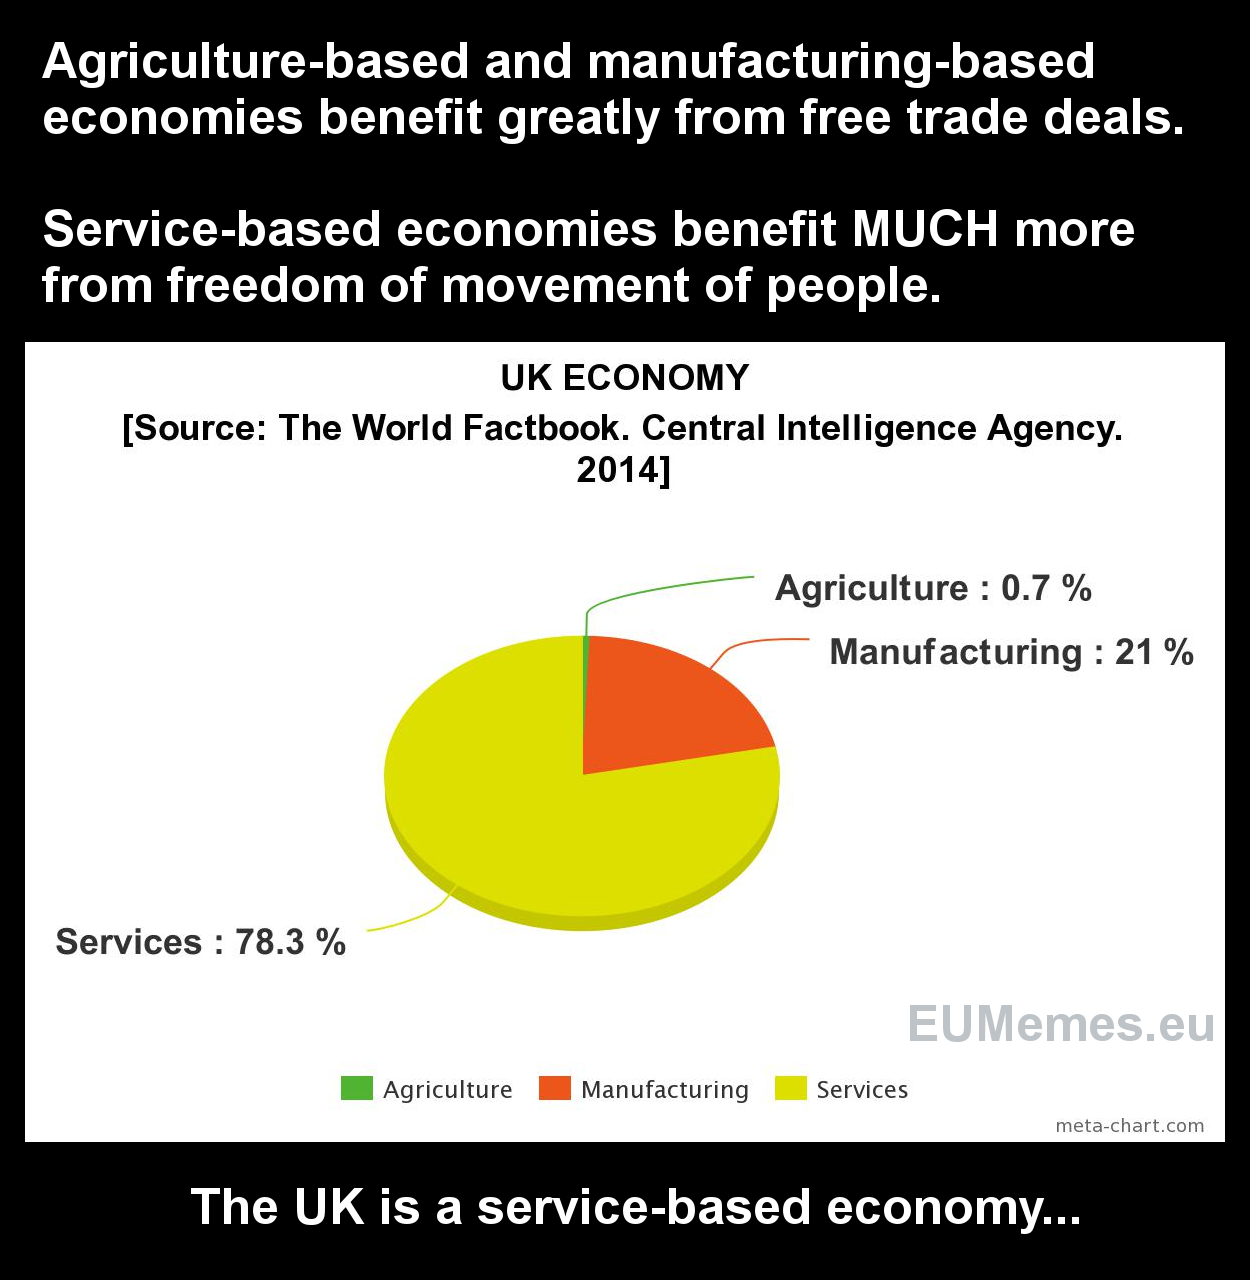 The UK's service-based economy needs the Single Market much more than it needs simple free trade deals.